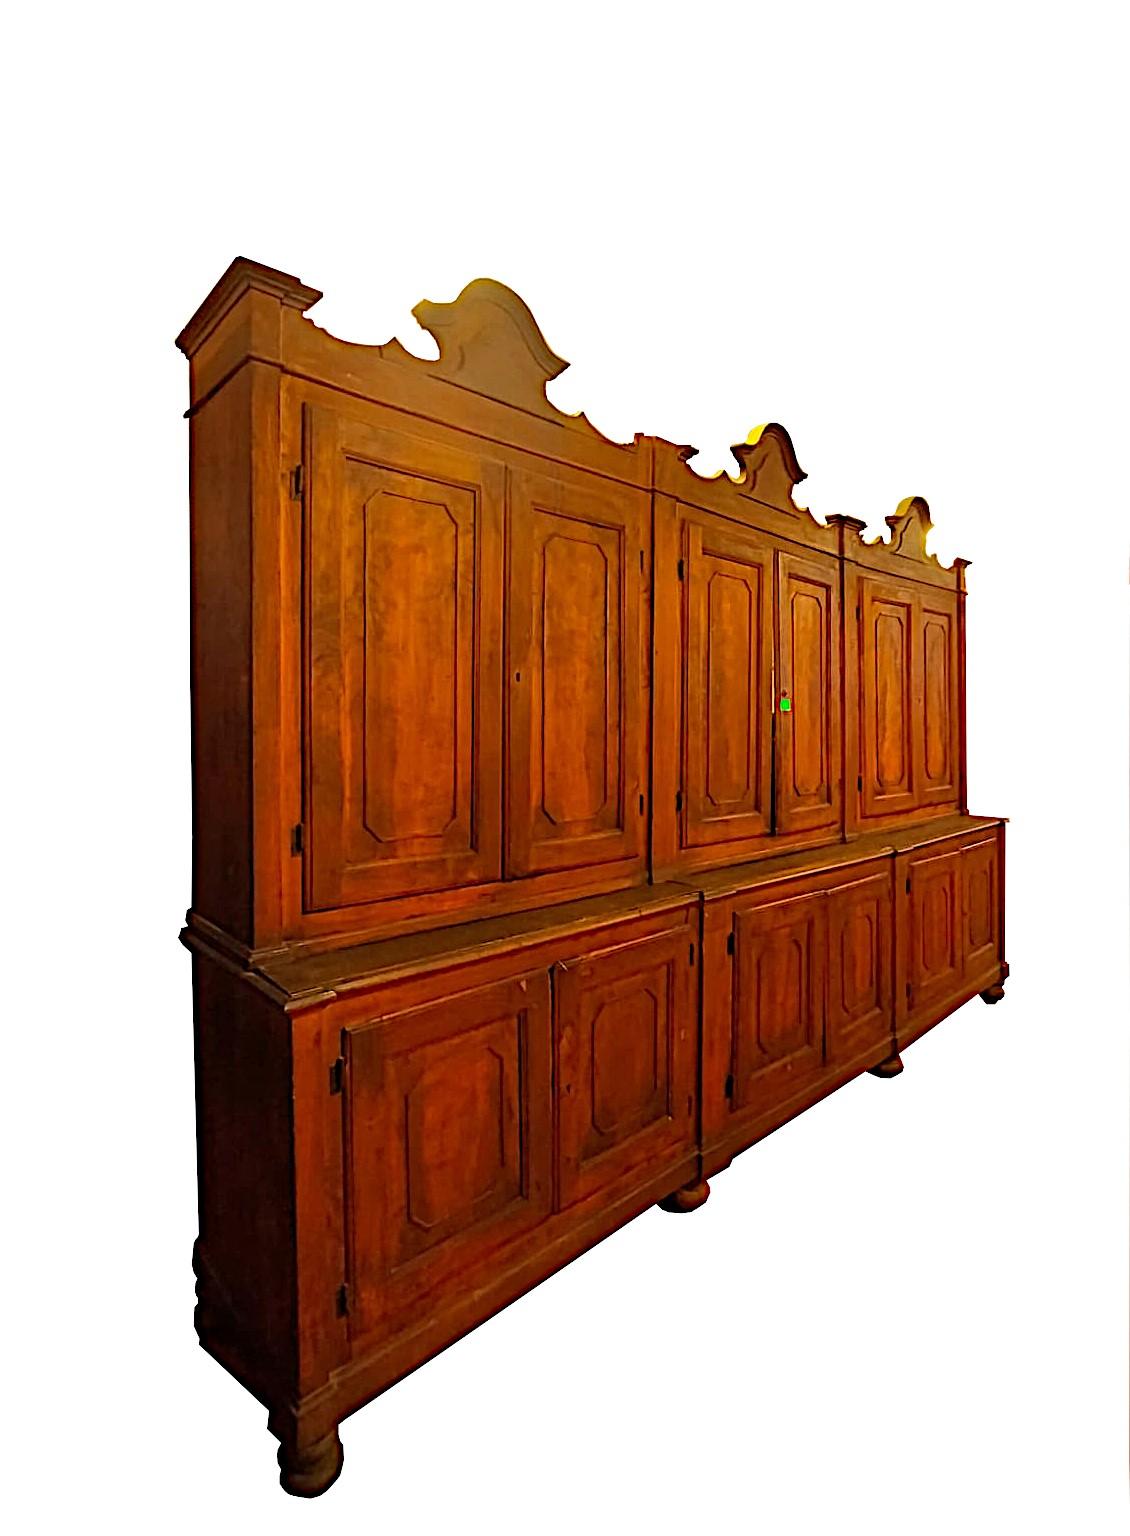 Large bookcase - 12-door archive, double-body cabinet.

Italy mid-19th century
Made of gattice (poplar type)
Lends itself to being lacquered
In patina.

Measures: Length 400 cm - Total height 265 - Depth 63 cm
Bookcase height cm 164, lower